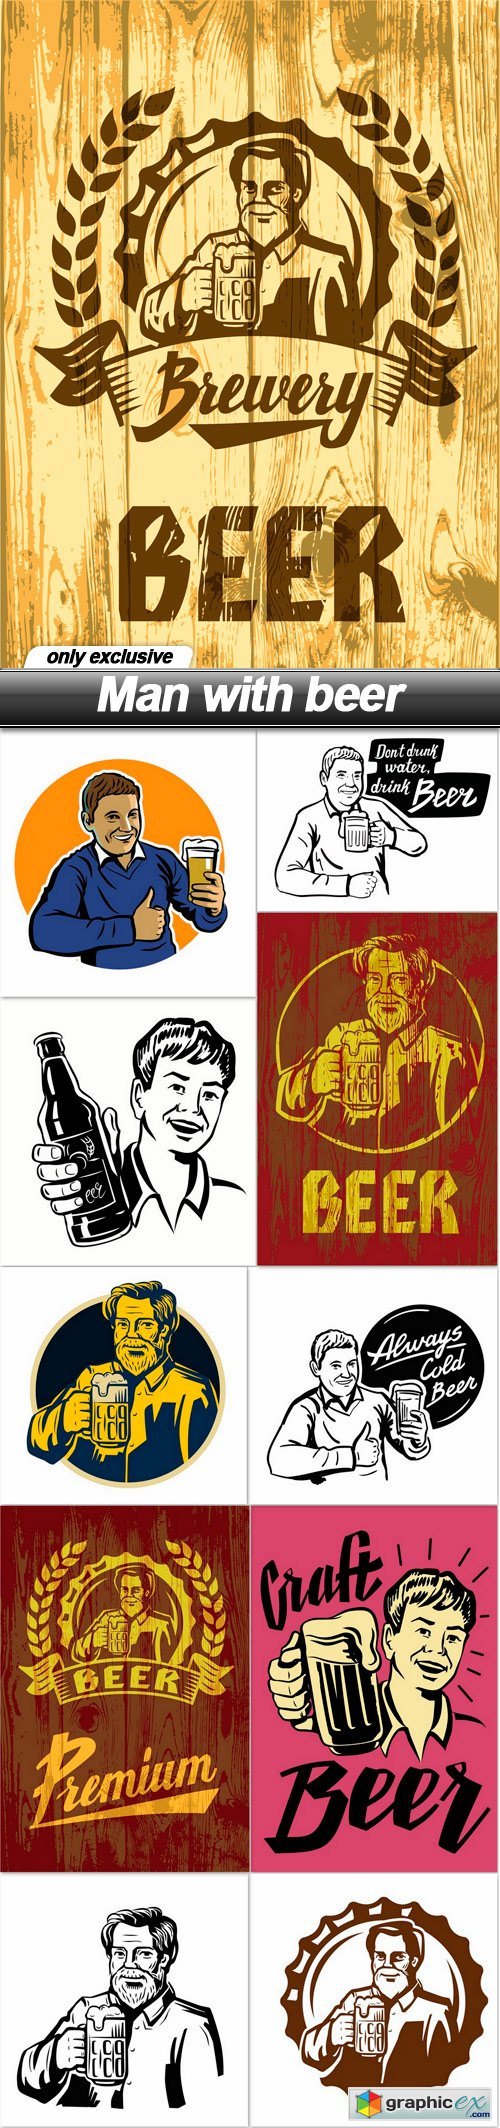 Man with beer - 11 EPS